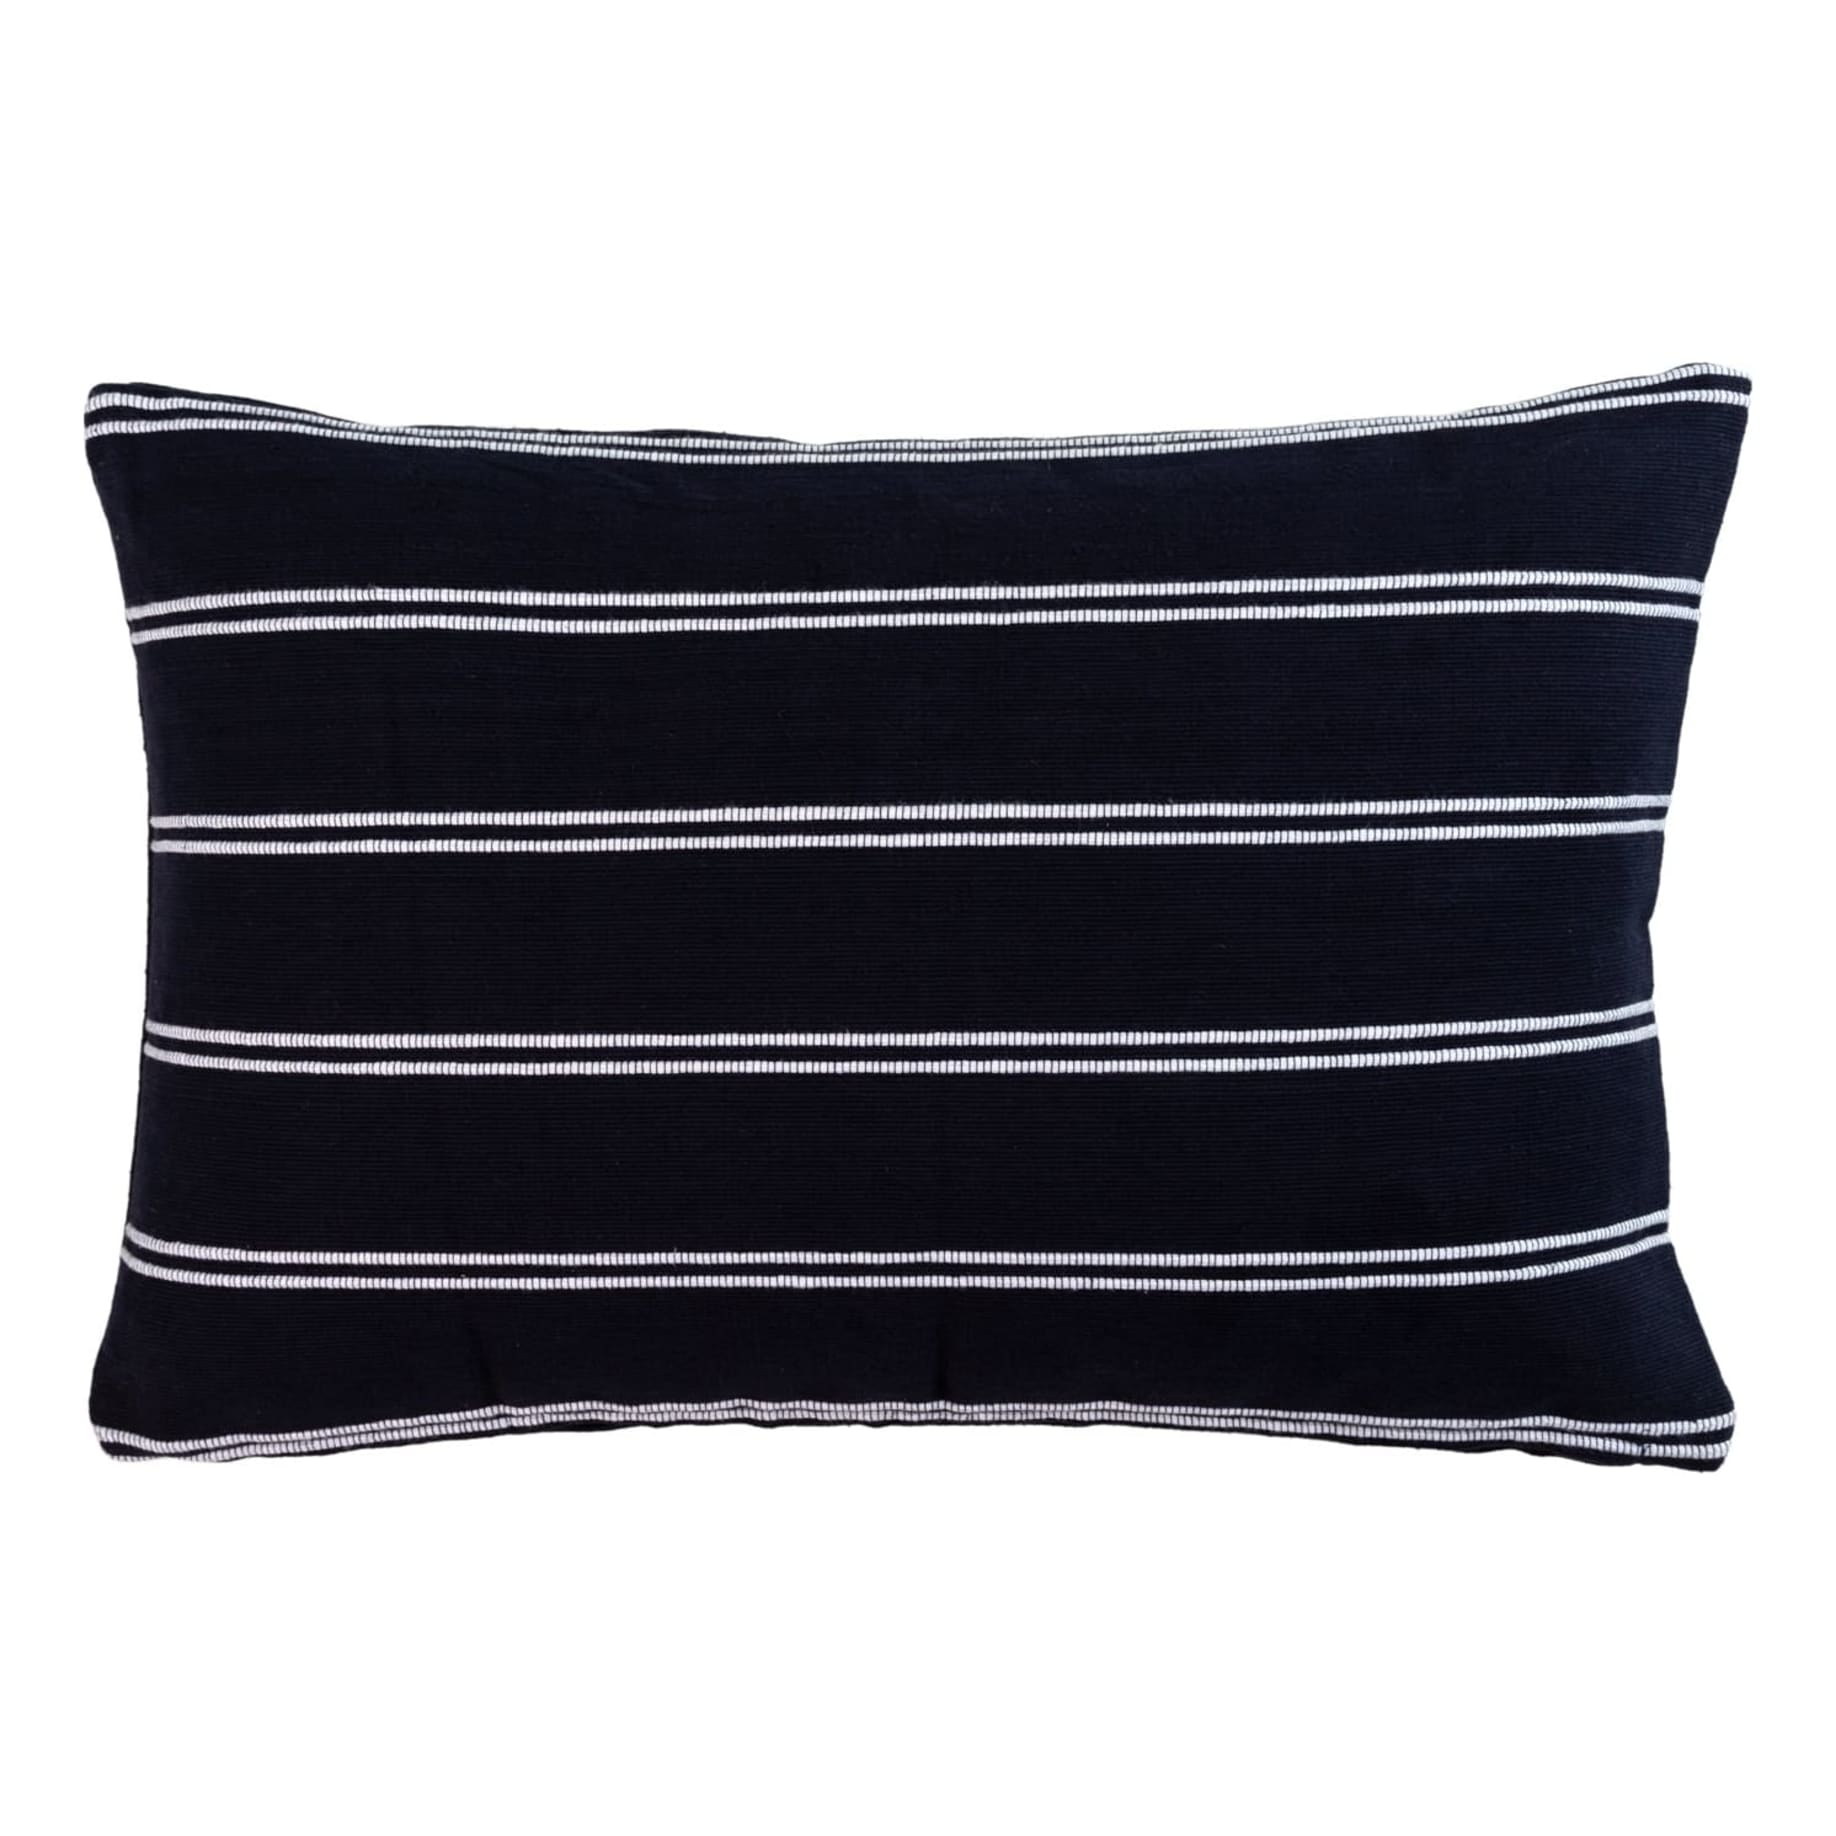 Montreal Feather Fill Cushion 60x40cm in Midnight